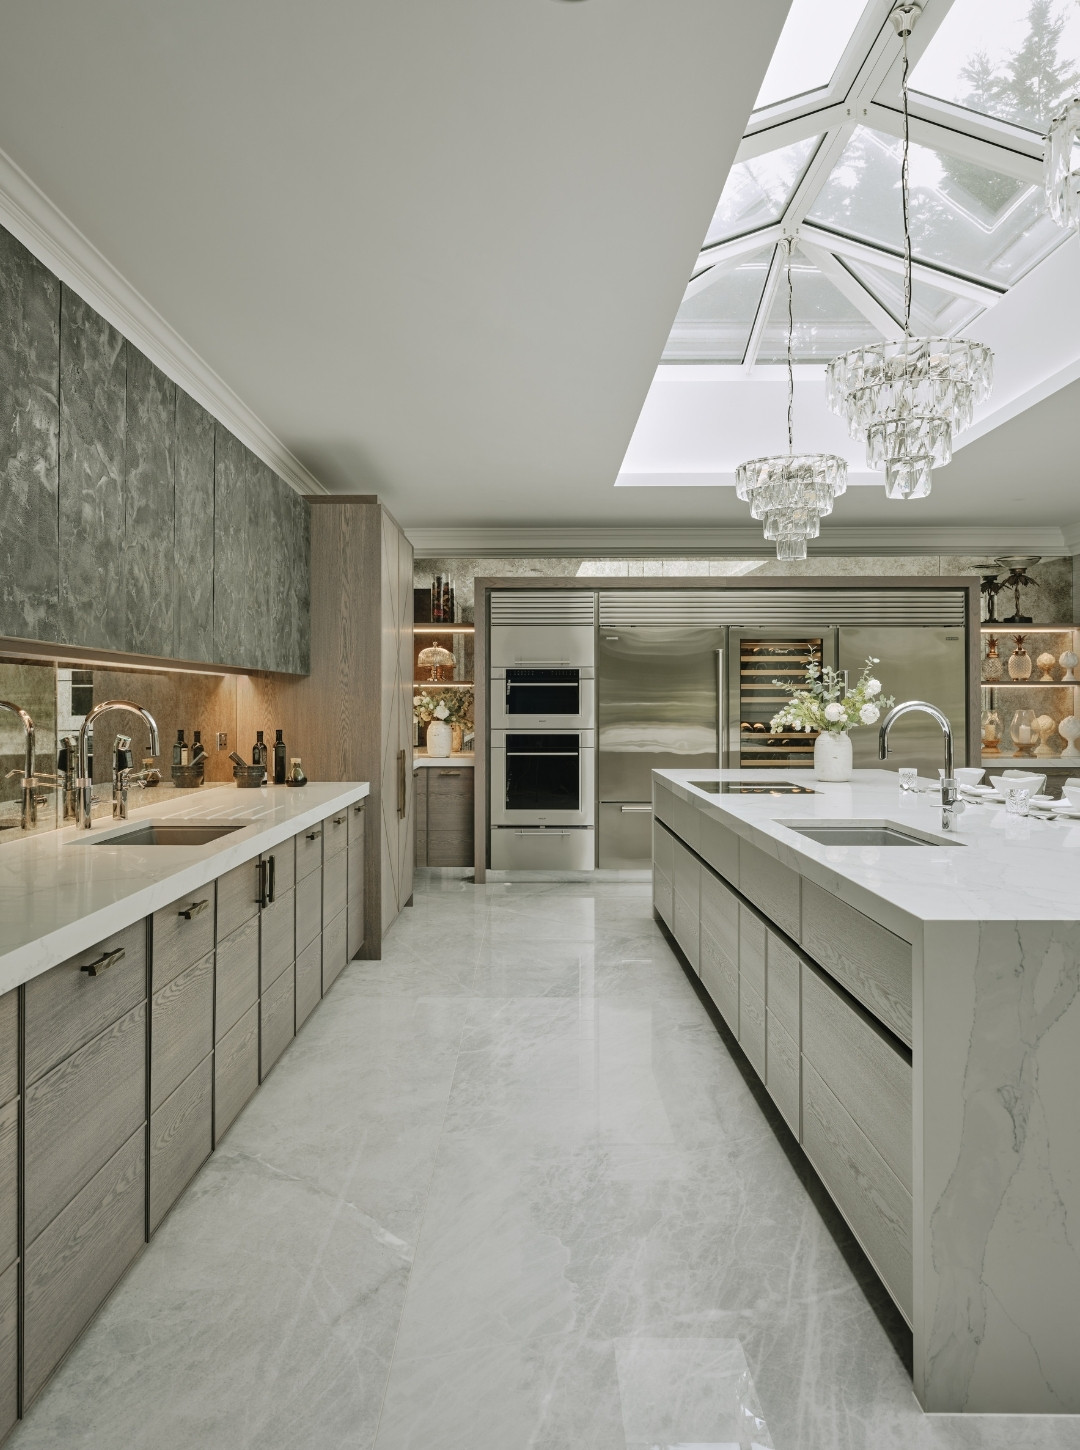 family kitchen, The New Ascot Kitchen is a Show-Stopping Design with Family Life at Its Heart